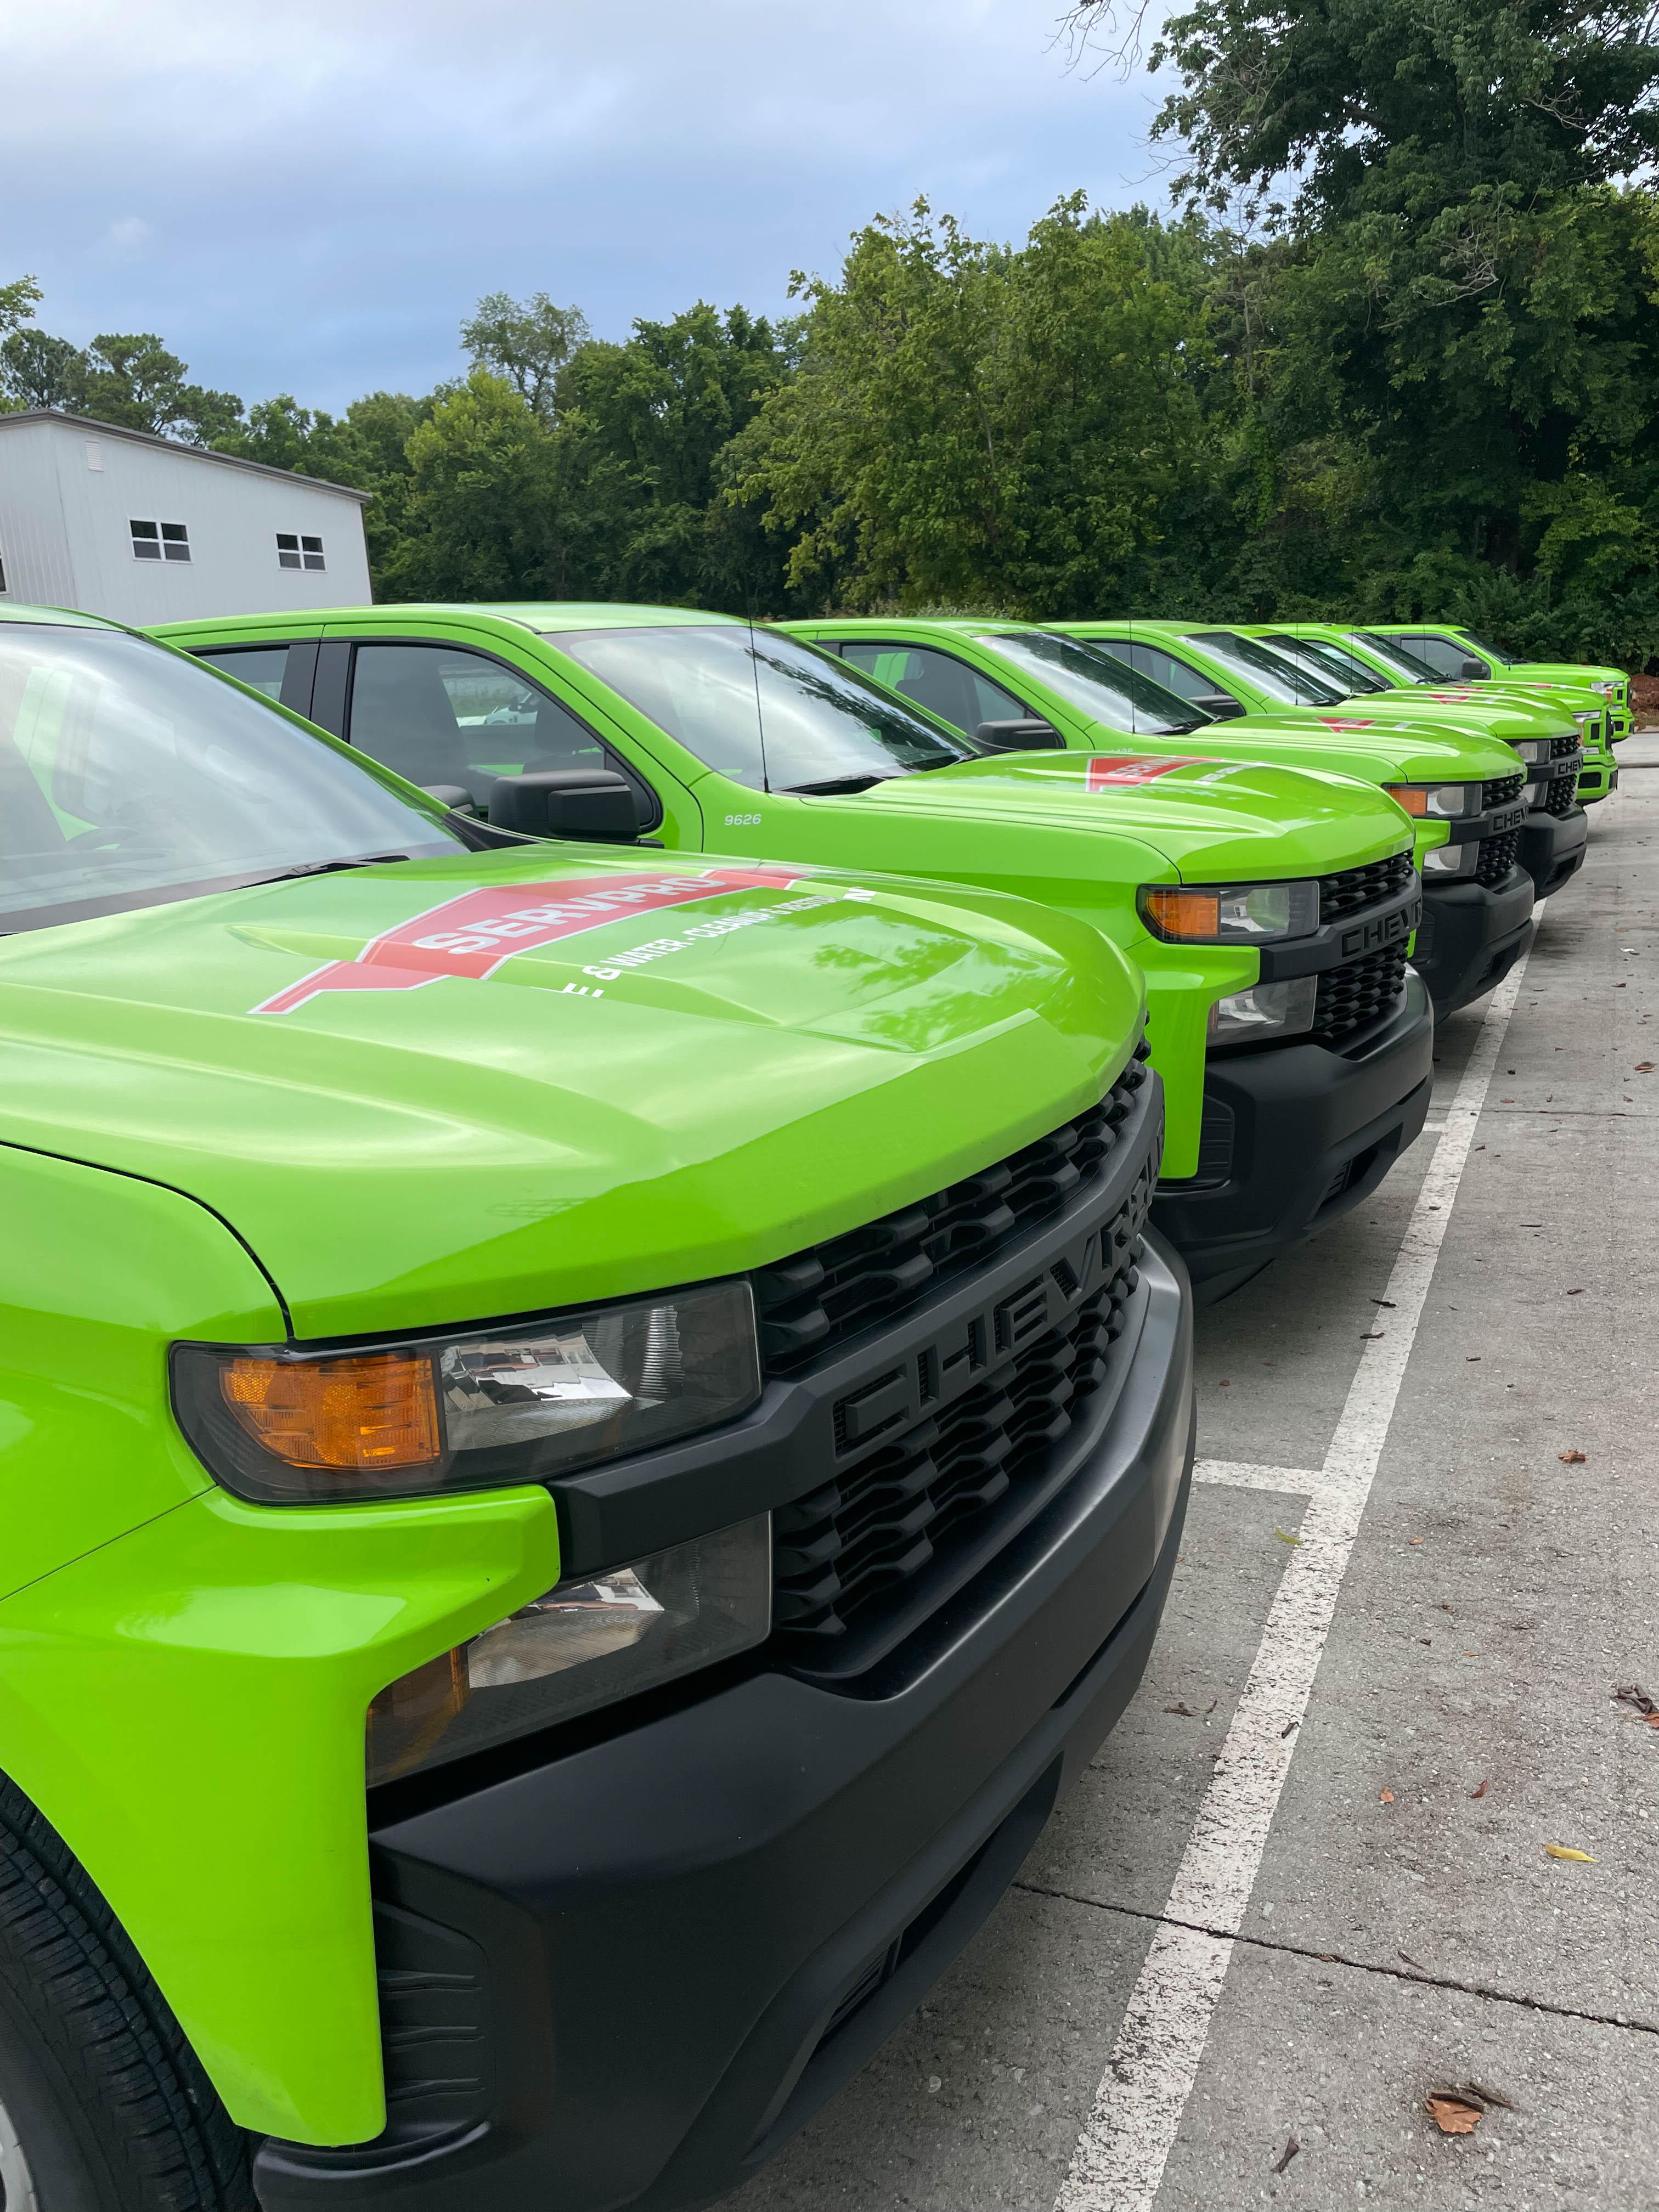 Just a reminder that SERVPRO of West Knoxville is open and operating! We can and will respond to your call when water, fire, or mold damages your home. Our team is prepared to respond in a safe manner following all mandated protocols.